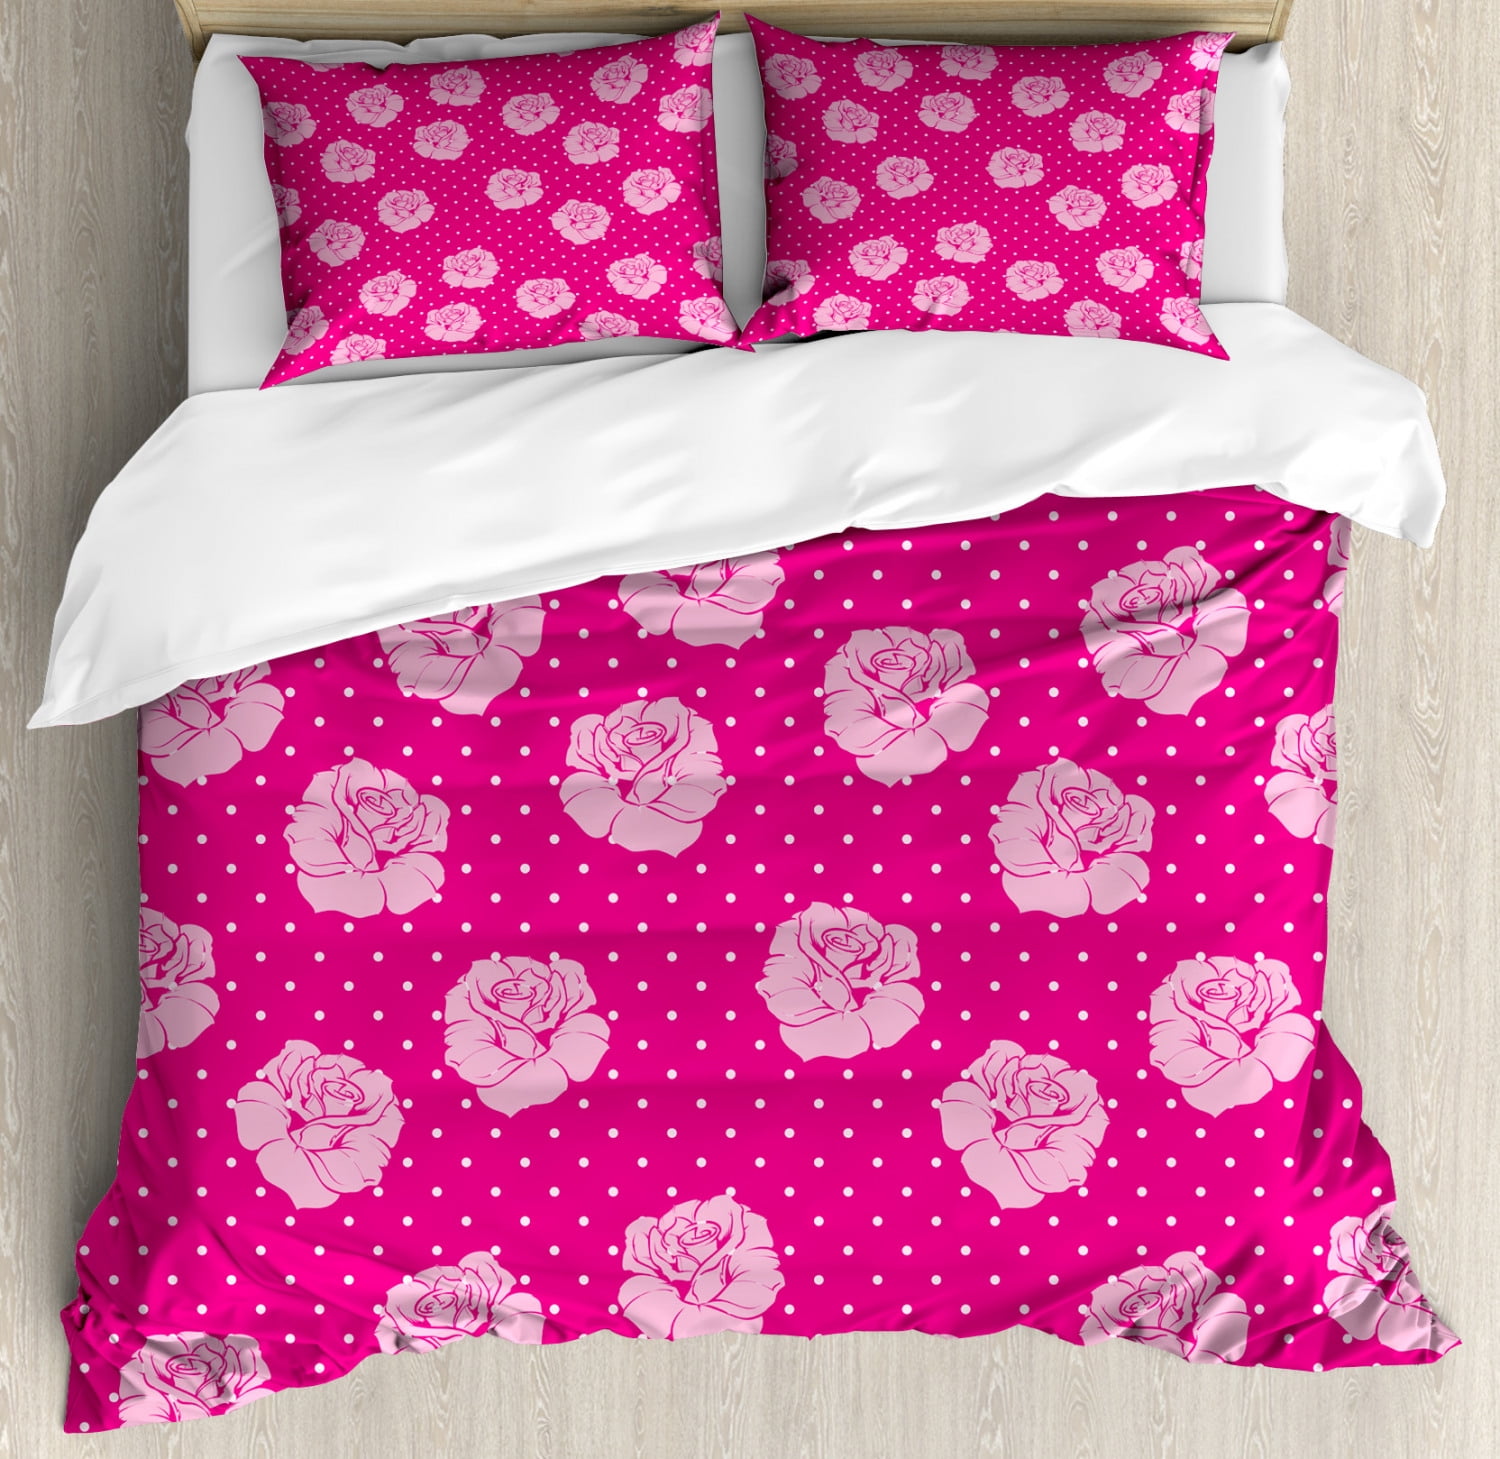 Hot Pink Duvet Cover Set Queen Size, White And Pink Duvet Cover Sets